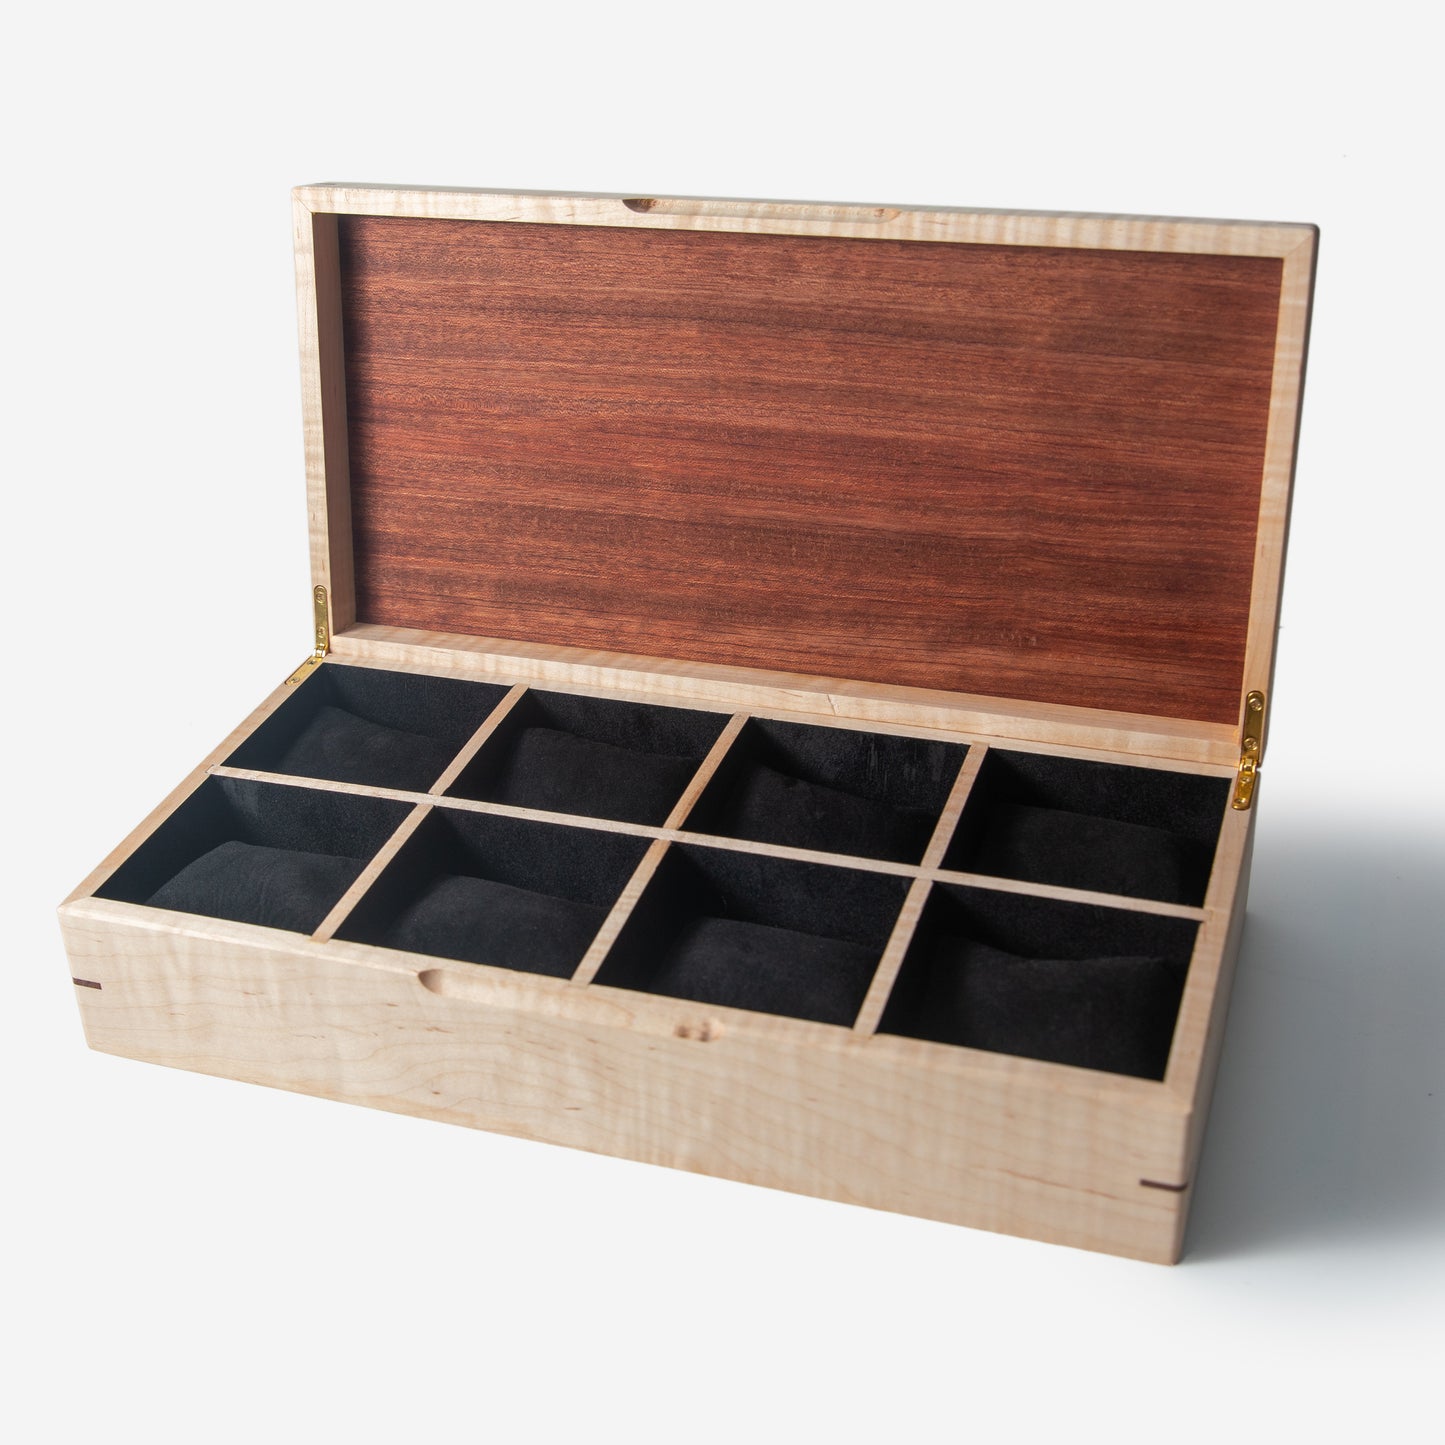 Watch Box - Curly Maple and Sapele Mahogany - 8 Watch Compartments